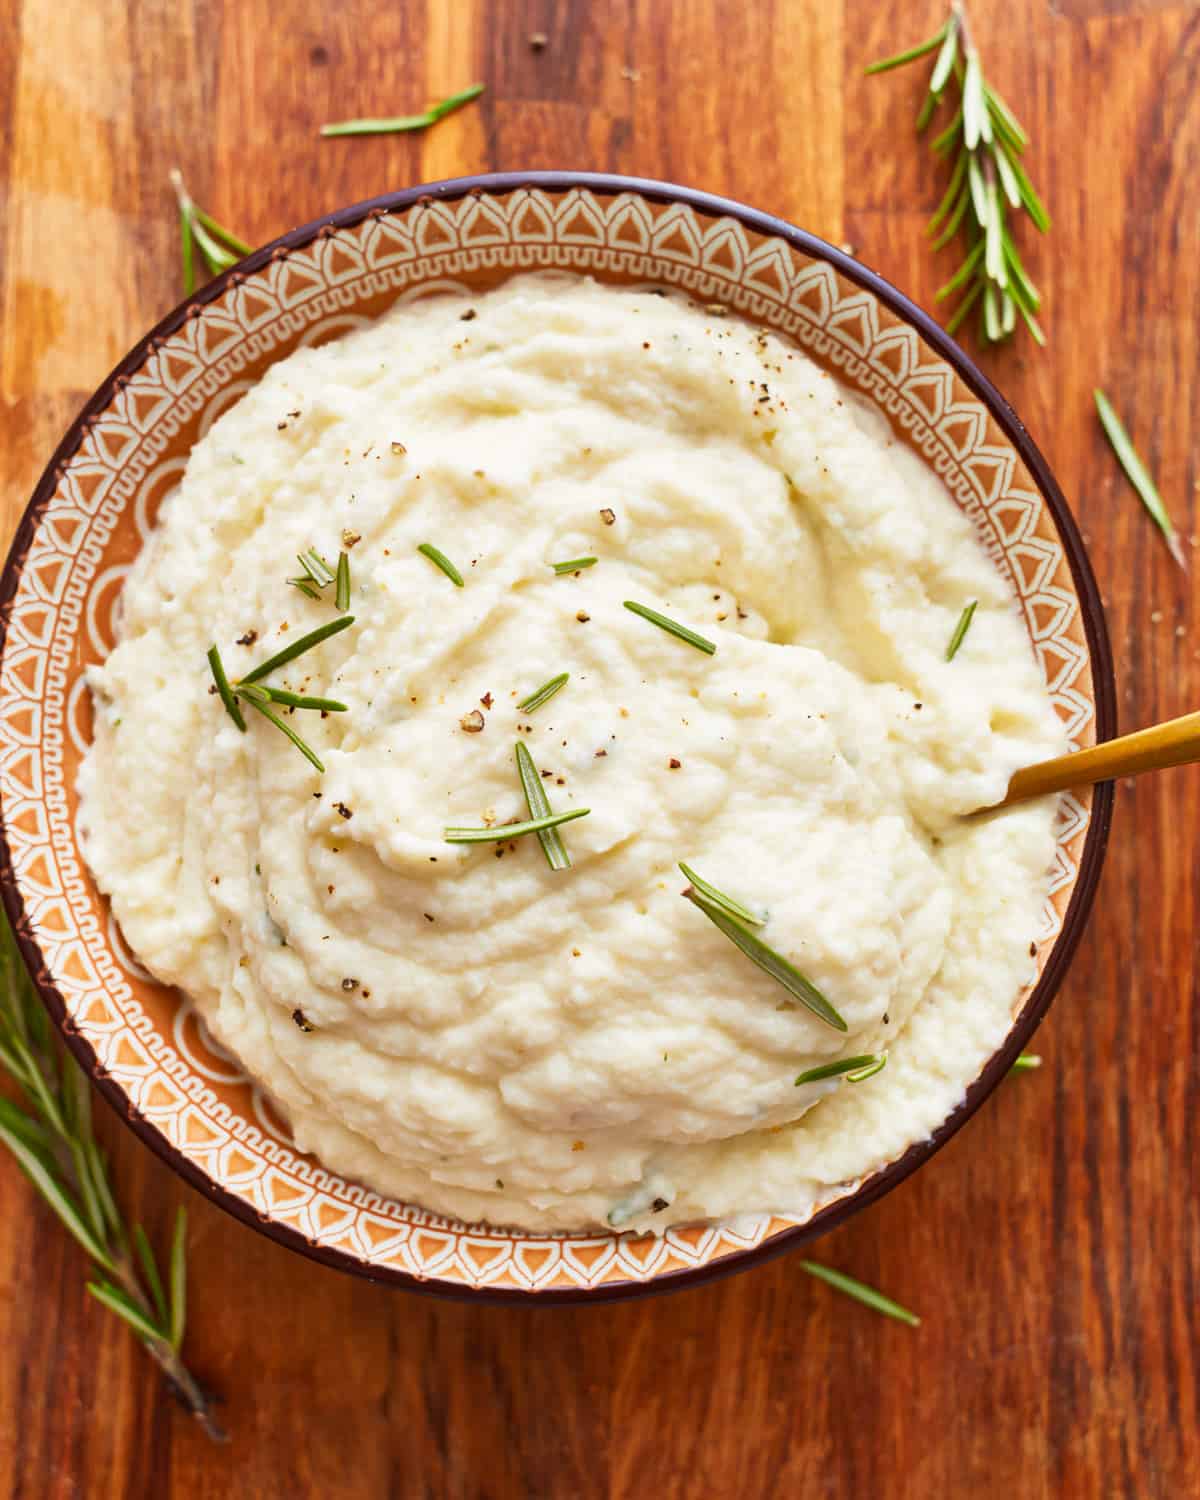 Mashed cauliflower in a bowl with rosemary sprigs.